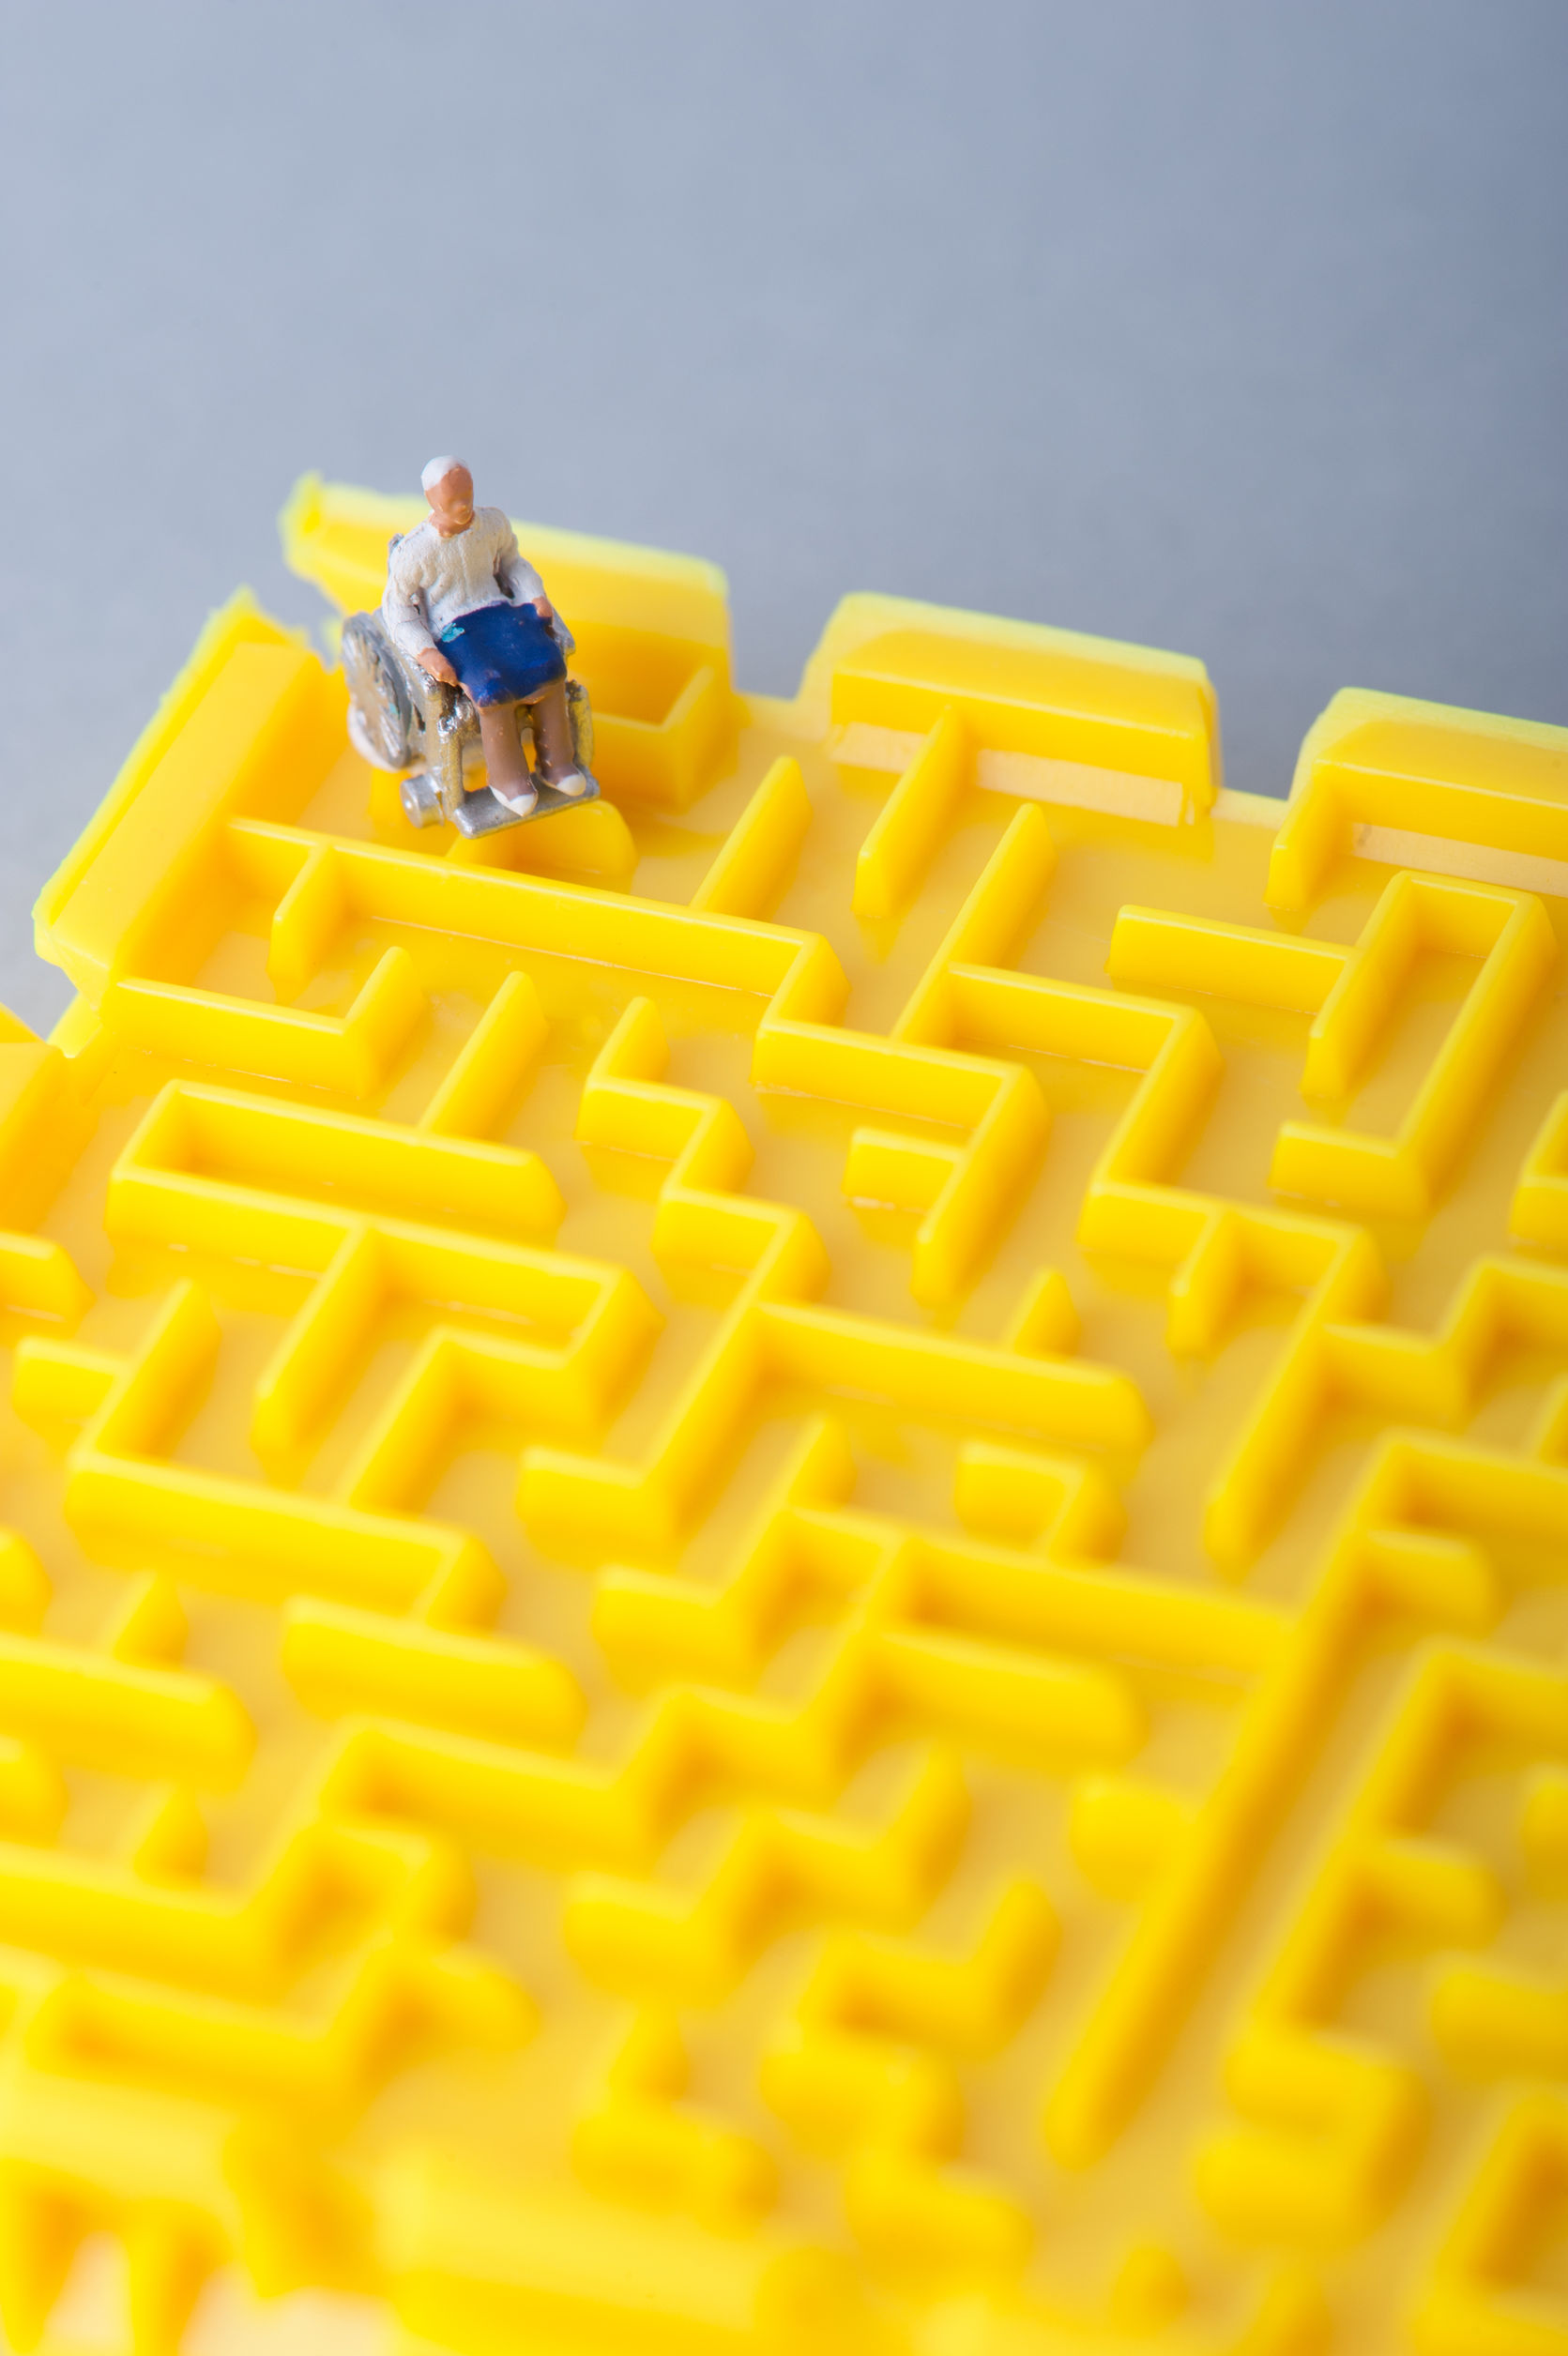 Miniature human in wheelchair and trapped in a yellow maze